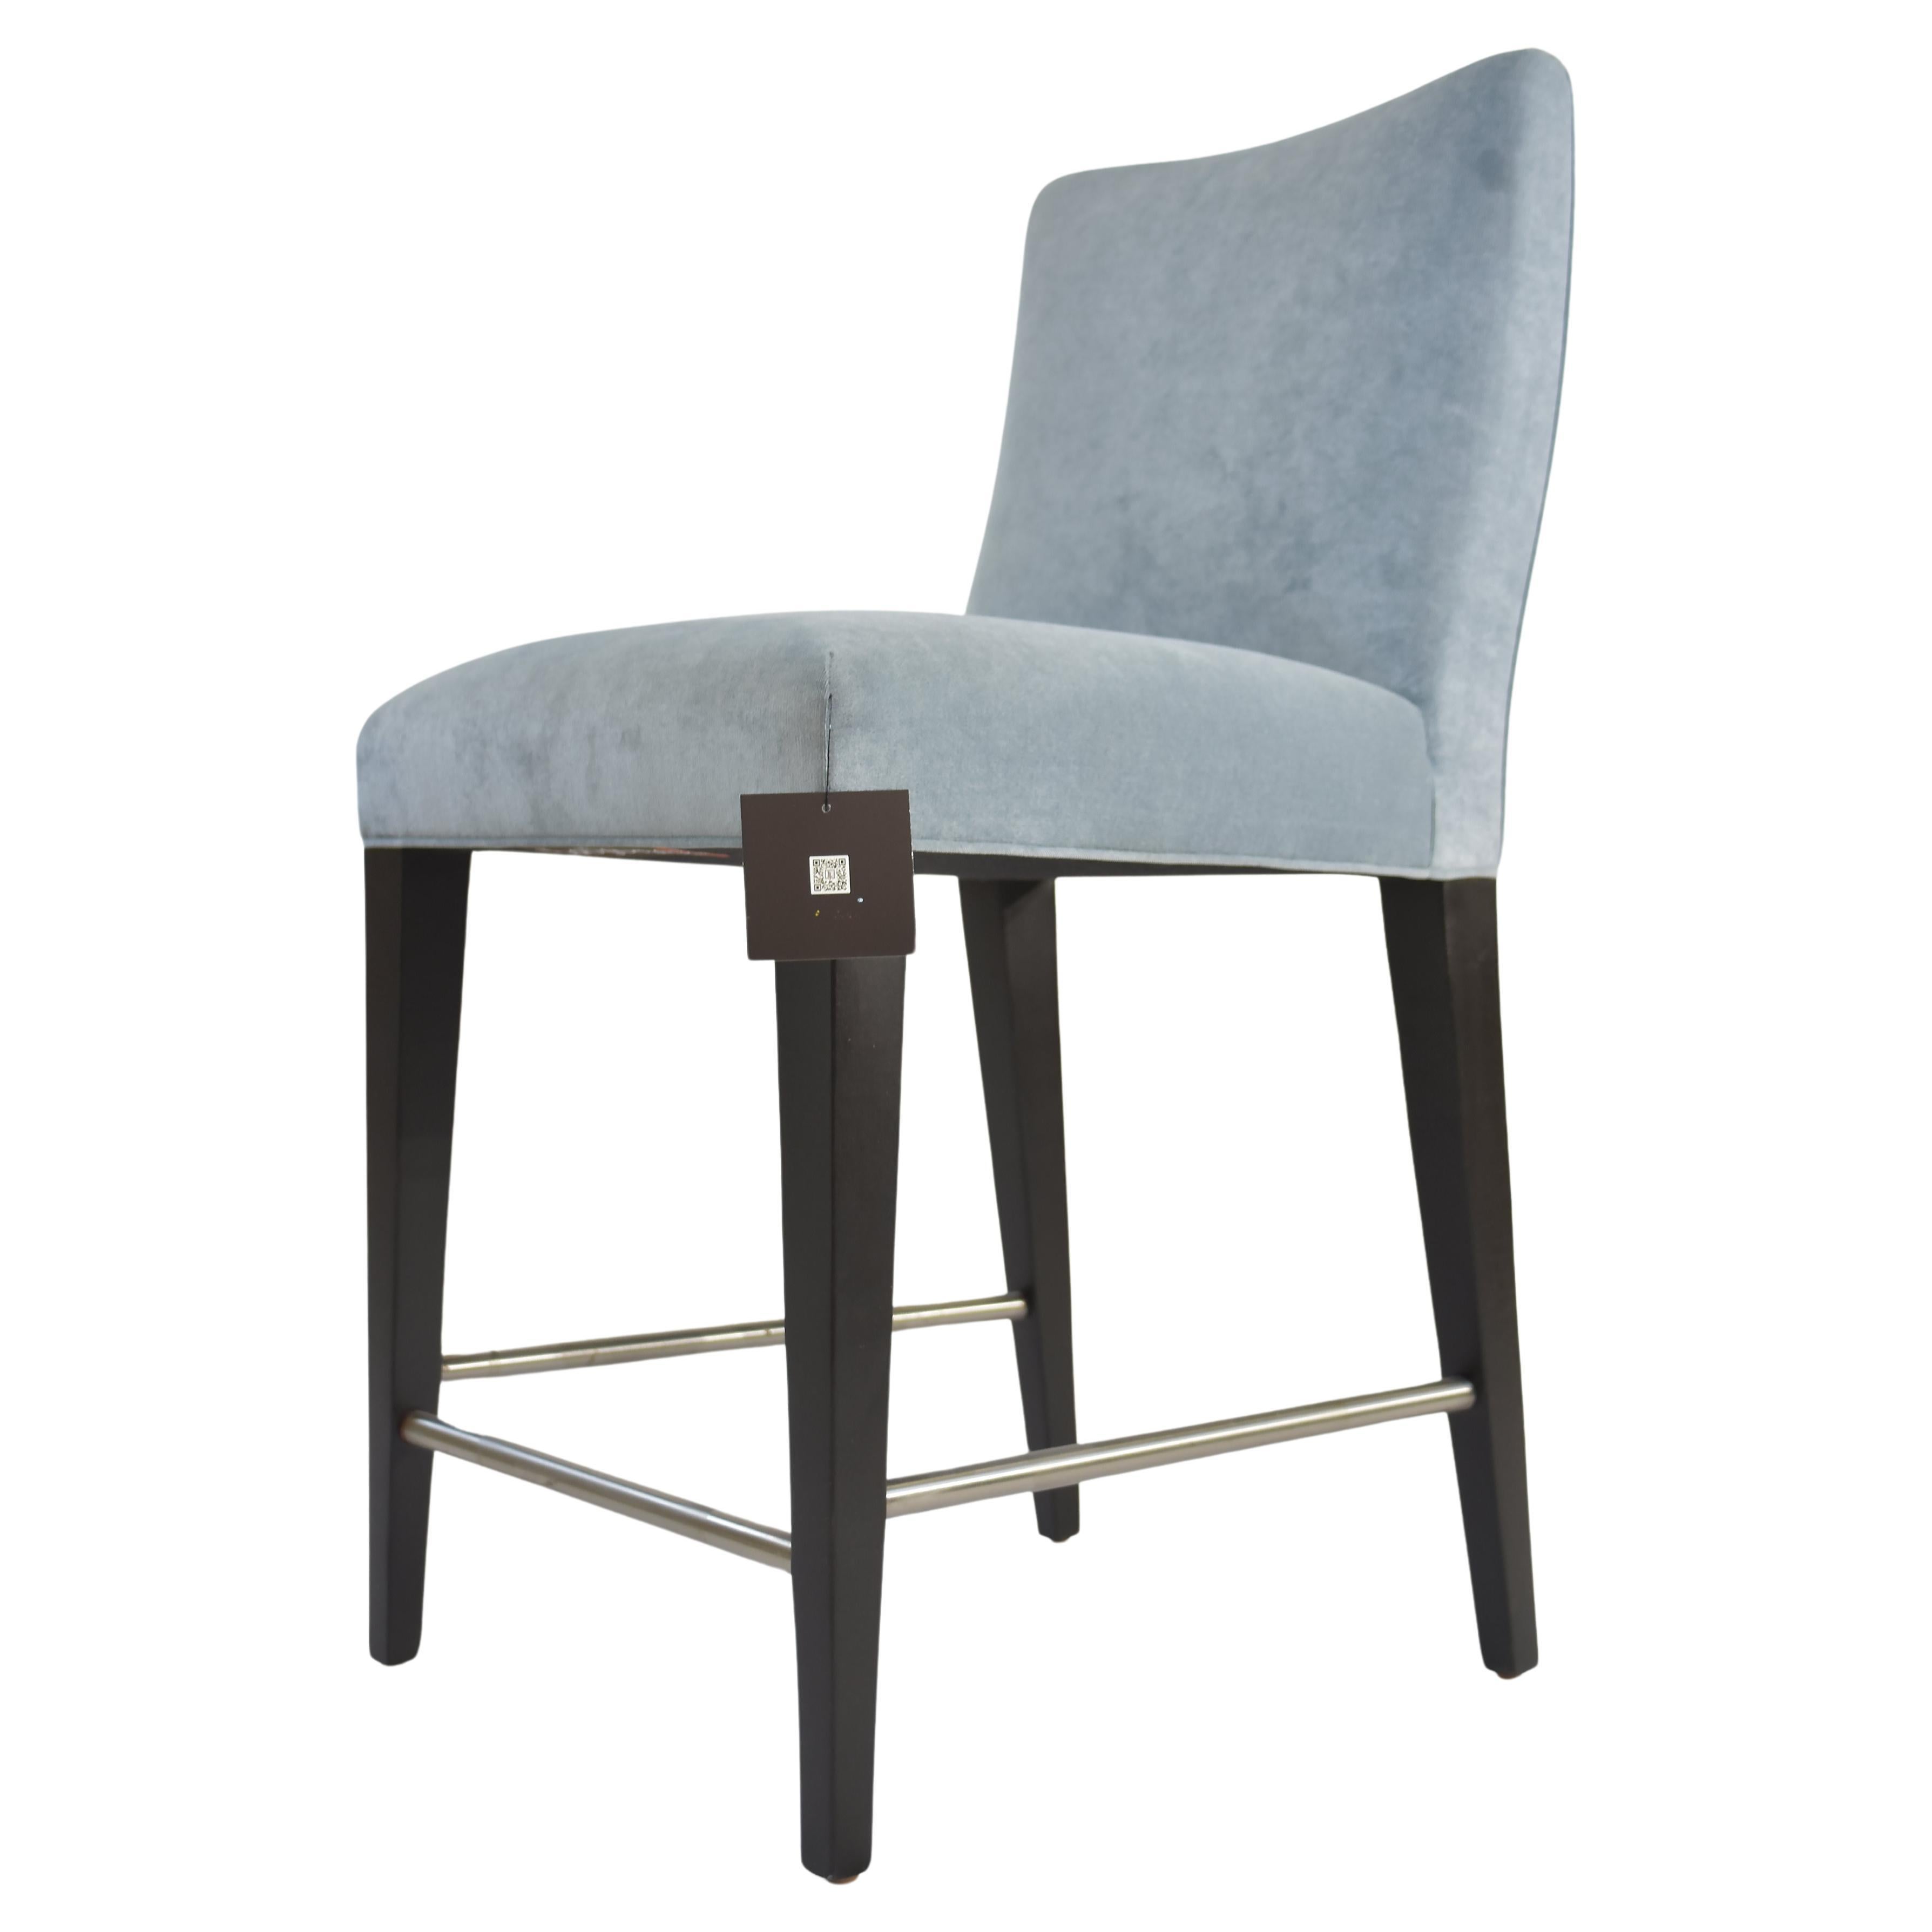 Le Jeune Upholstery Regal Counter Stool Showroom Model For Sale